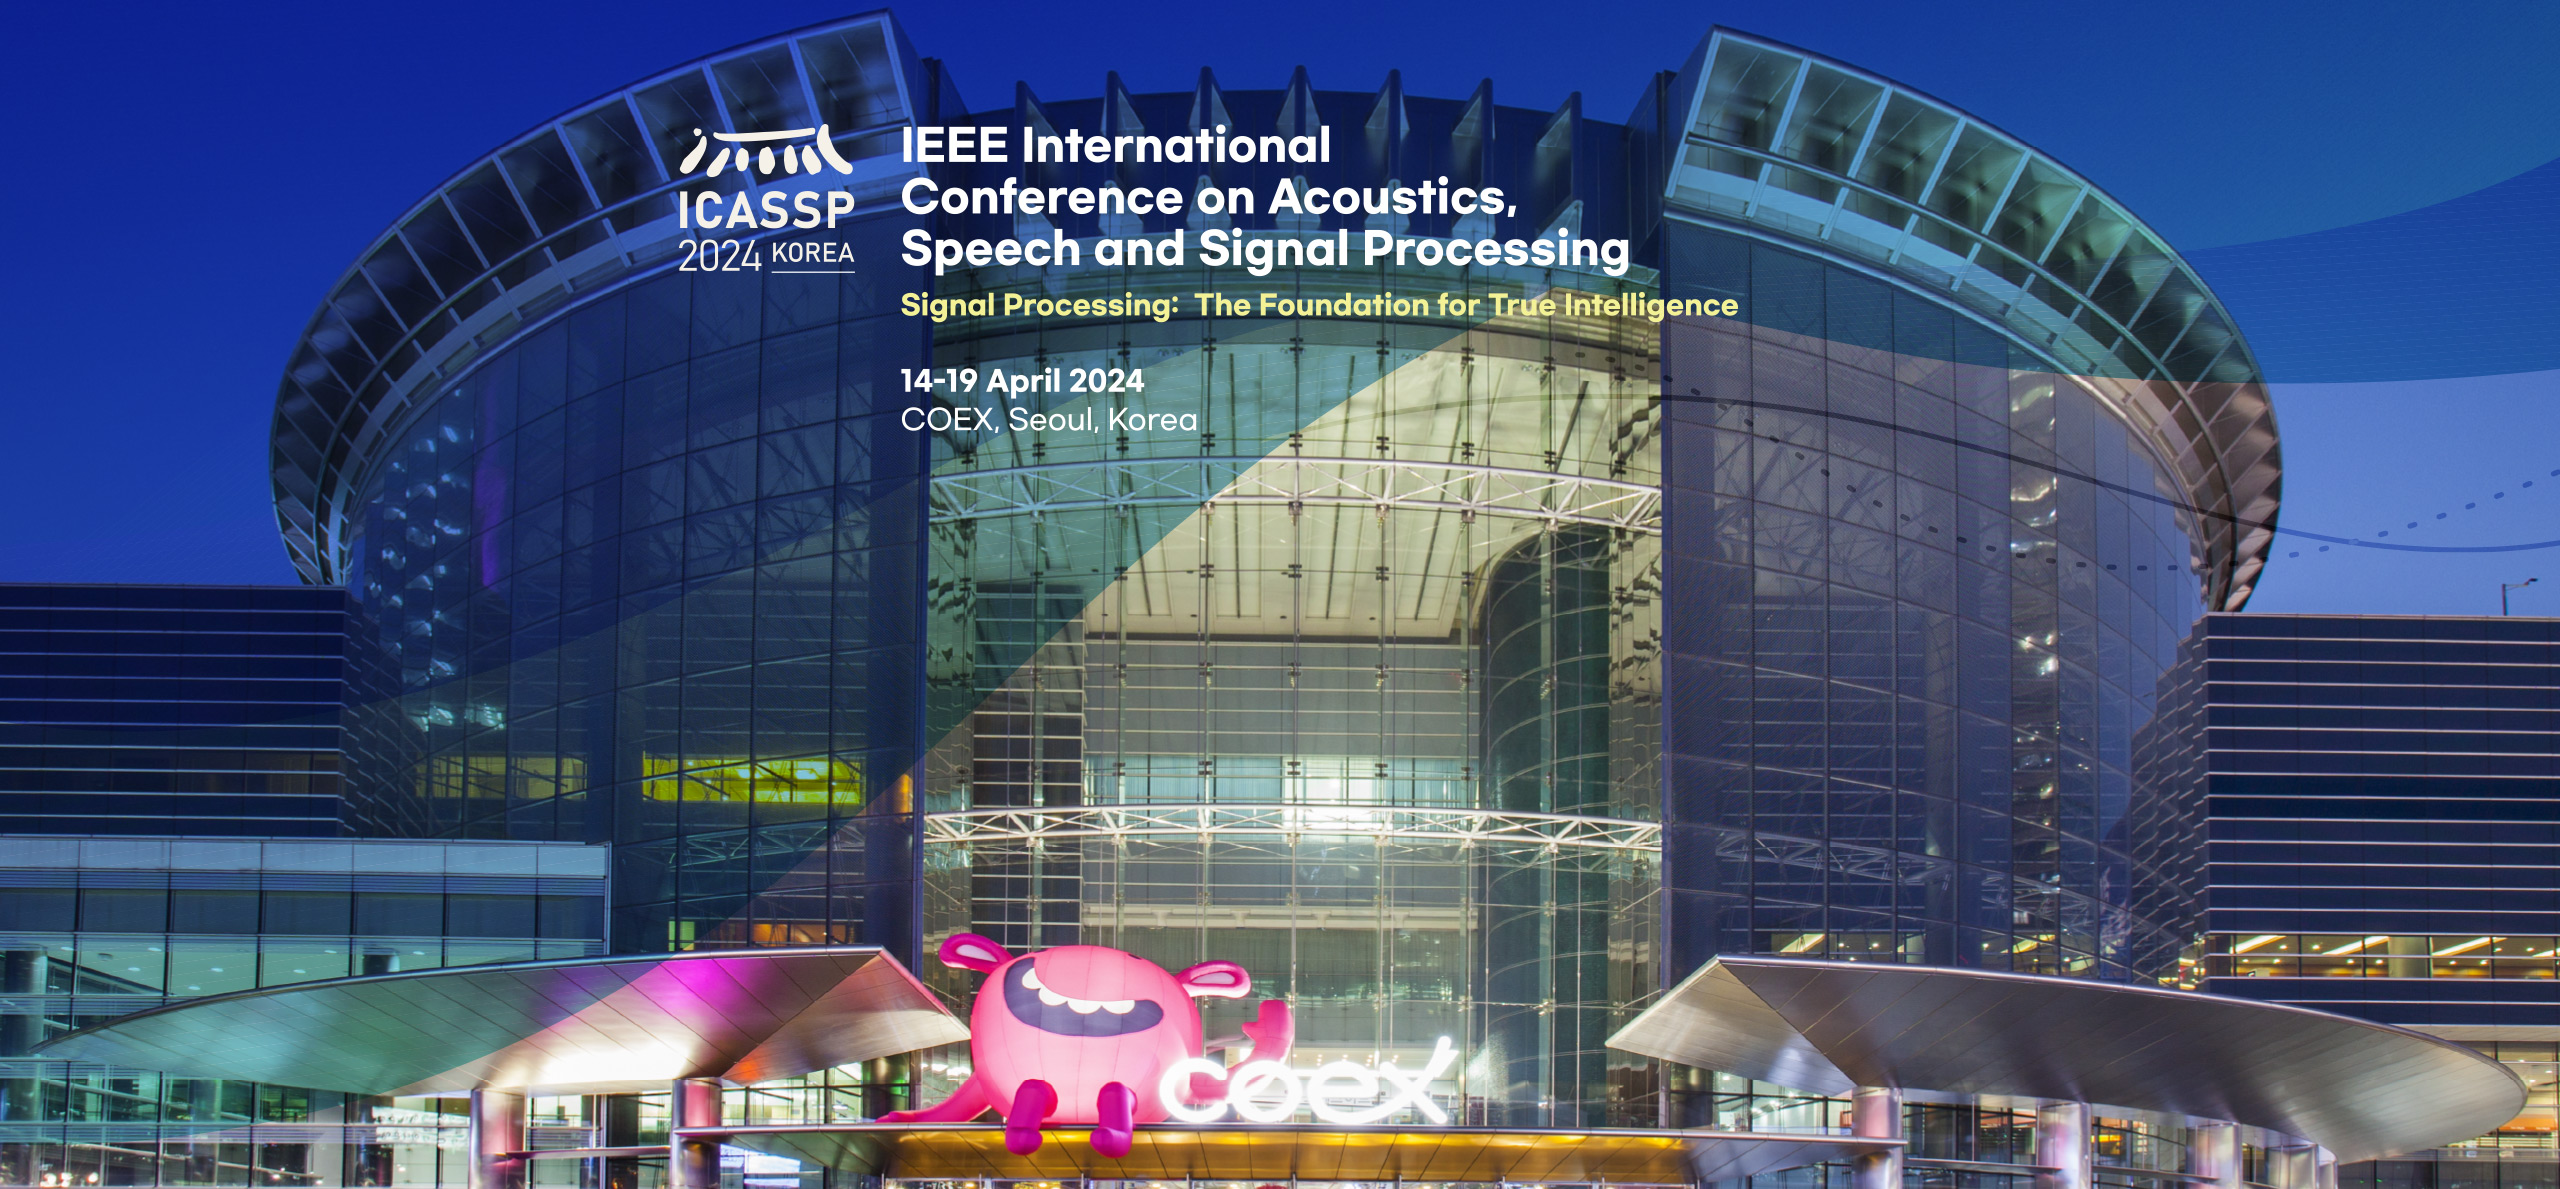 Get to COEX 2024 IEEE International Conference on Acoustics, Speech